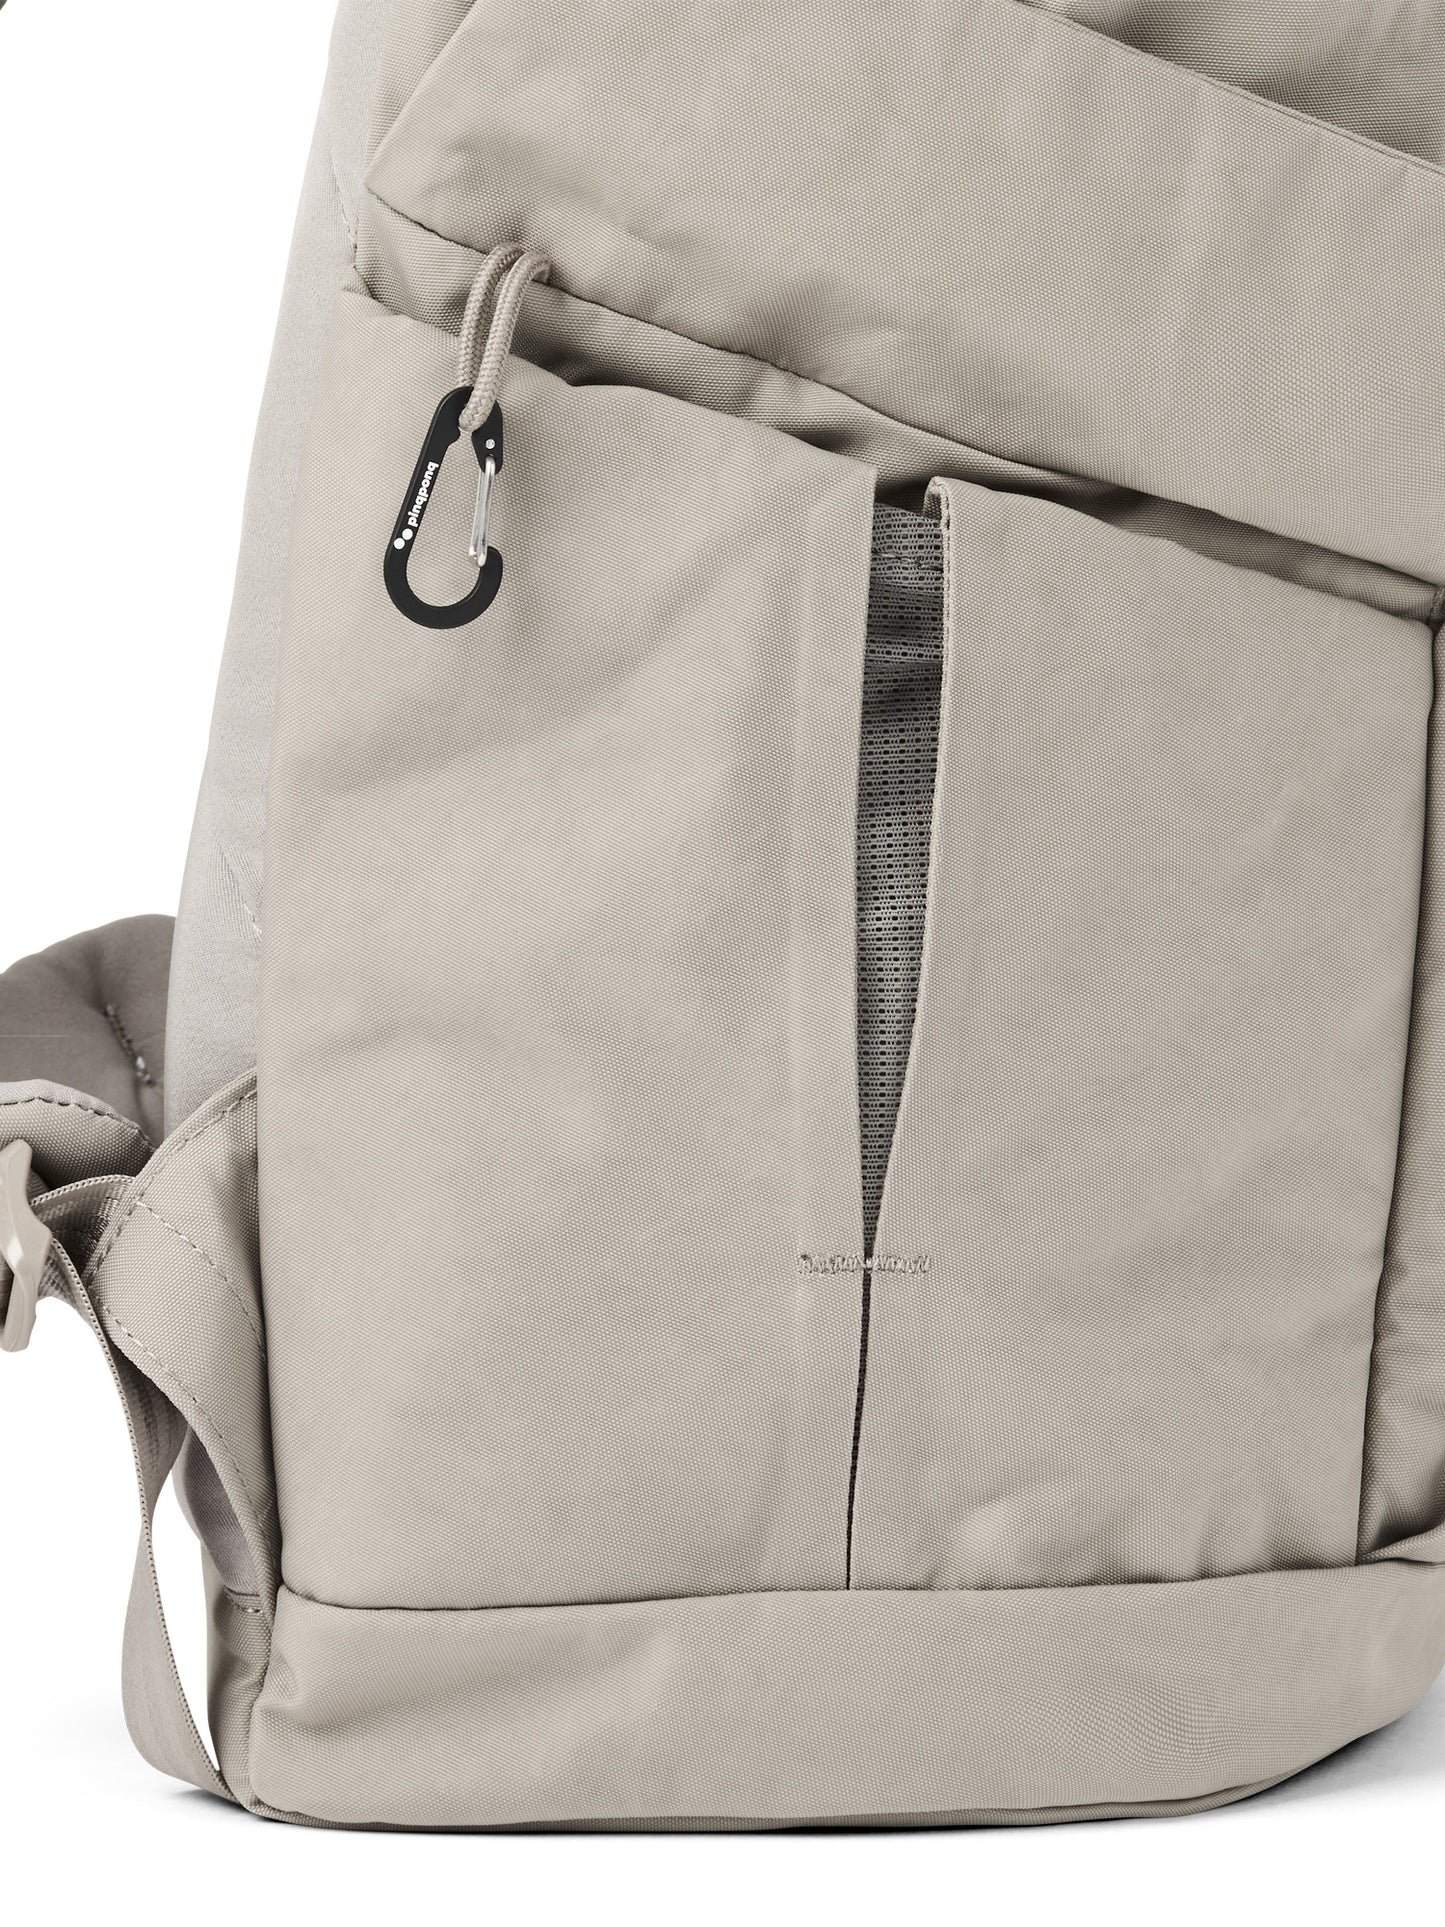 pinqponq-backpack-Kross-Crinkle-Taupe-material